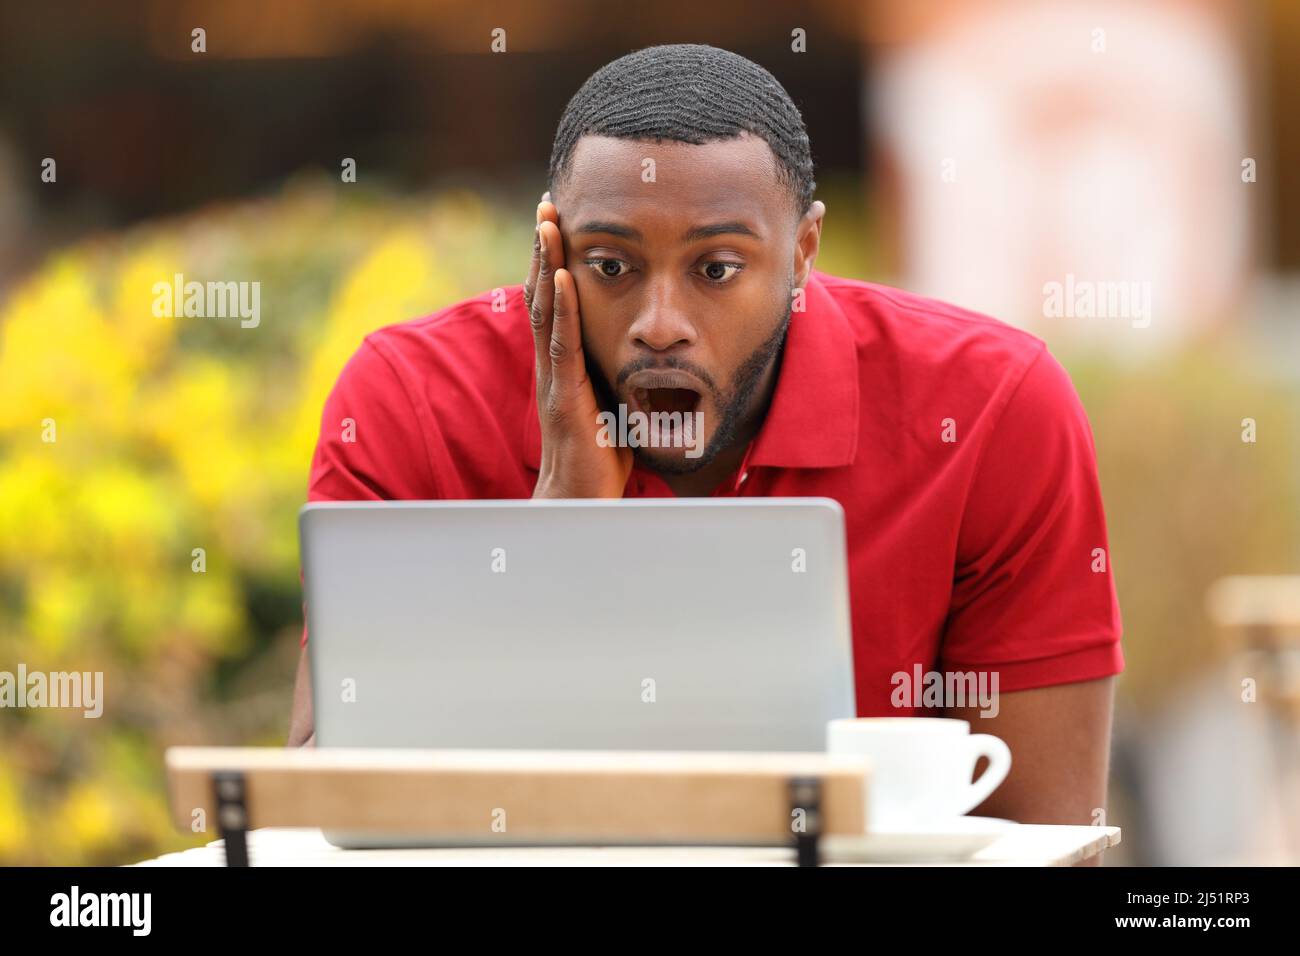 Front view portrait of a shocked man with black skin checking laptop in a coffee shop terrace Stock Photo